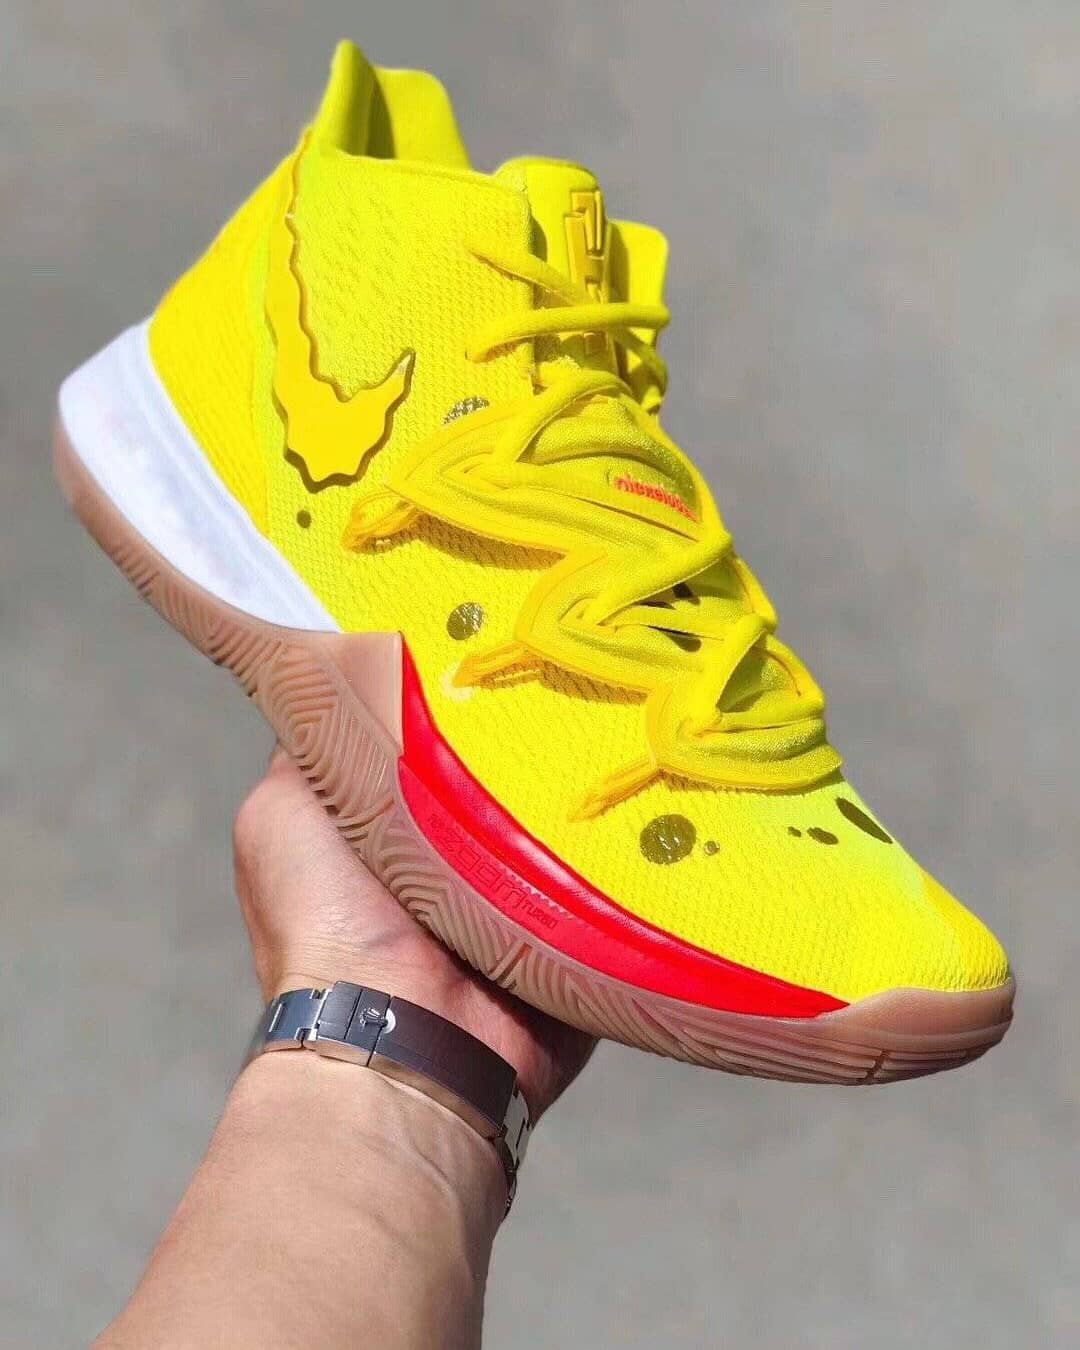 Discount Kyrie 5 Basketball Shoes Replica Basketball Shoes